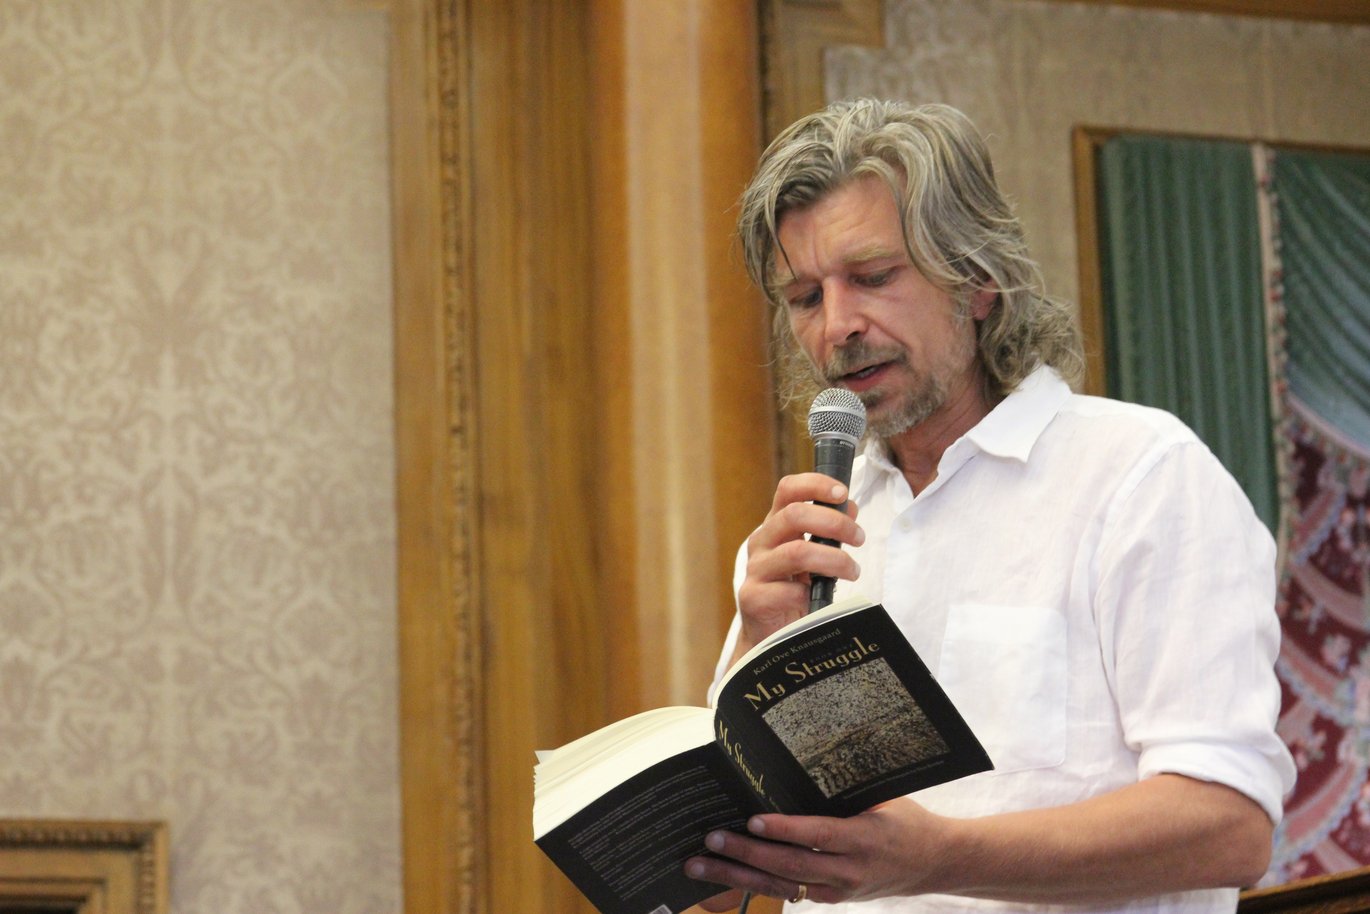 A waist-up picture of Karl Ove Knausgård. He is wearing a white shirt and has grey hair and a grey beard. In one hand he is holding a book with the title "My Struggle" and in the other hand he has a microphone lifted to his mouth.